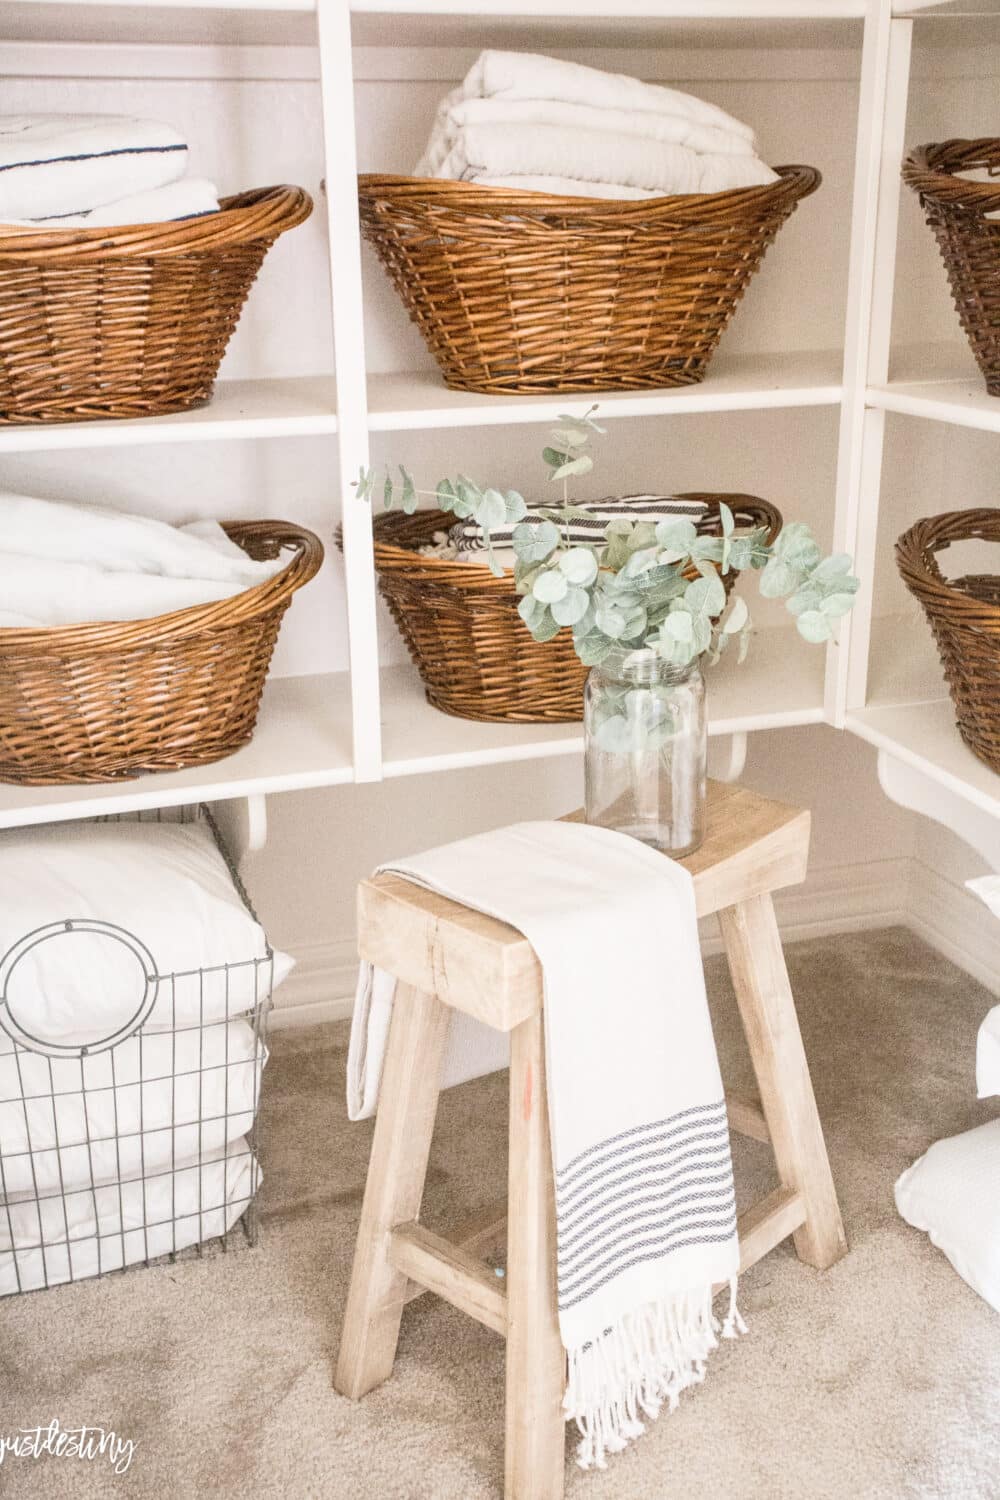 Linen closet with basket used for organization